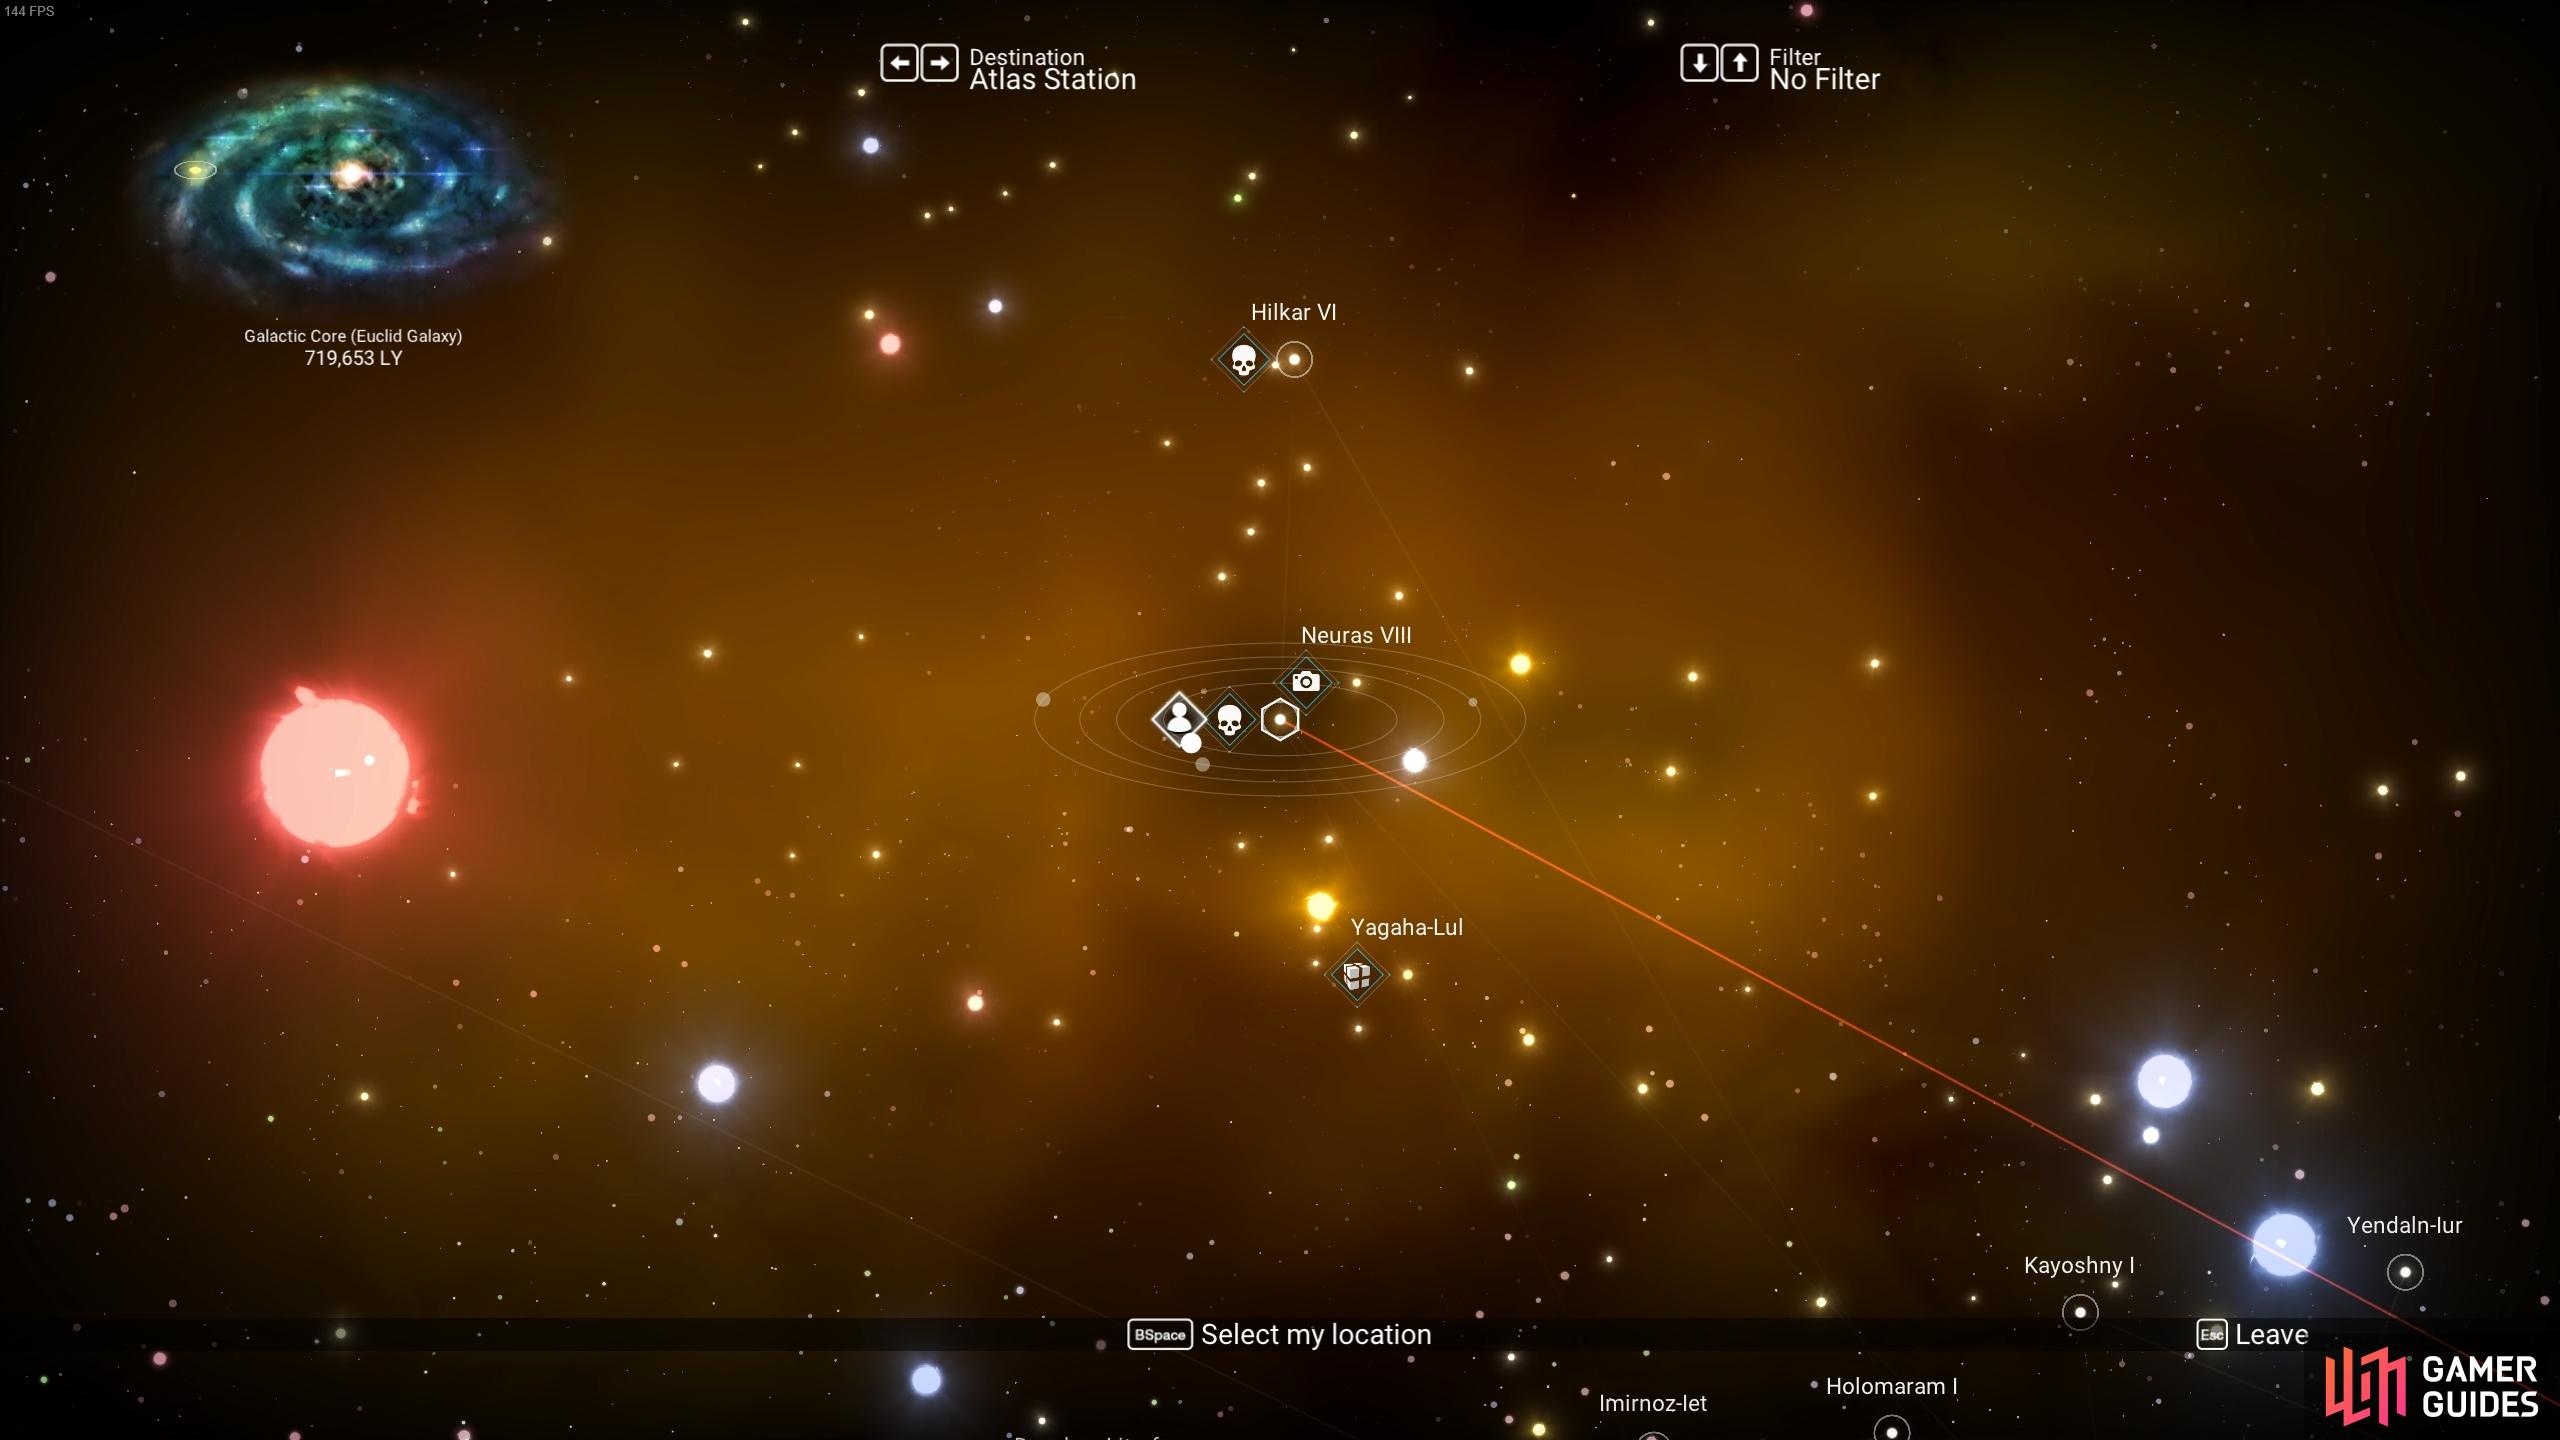 You can check the Galaxy Map to see which missions are restricted to specific systems.